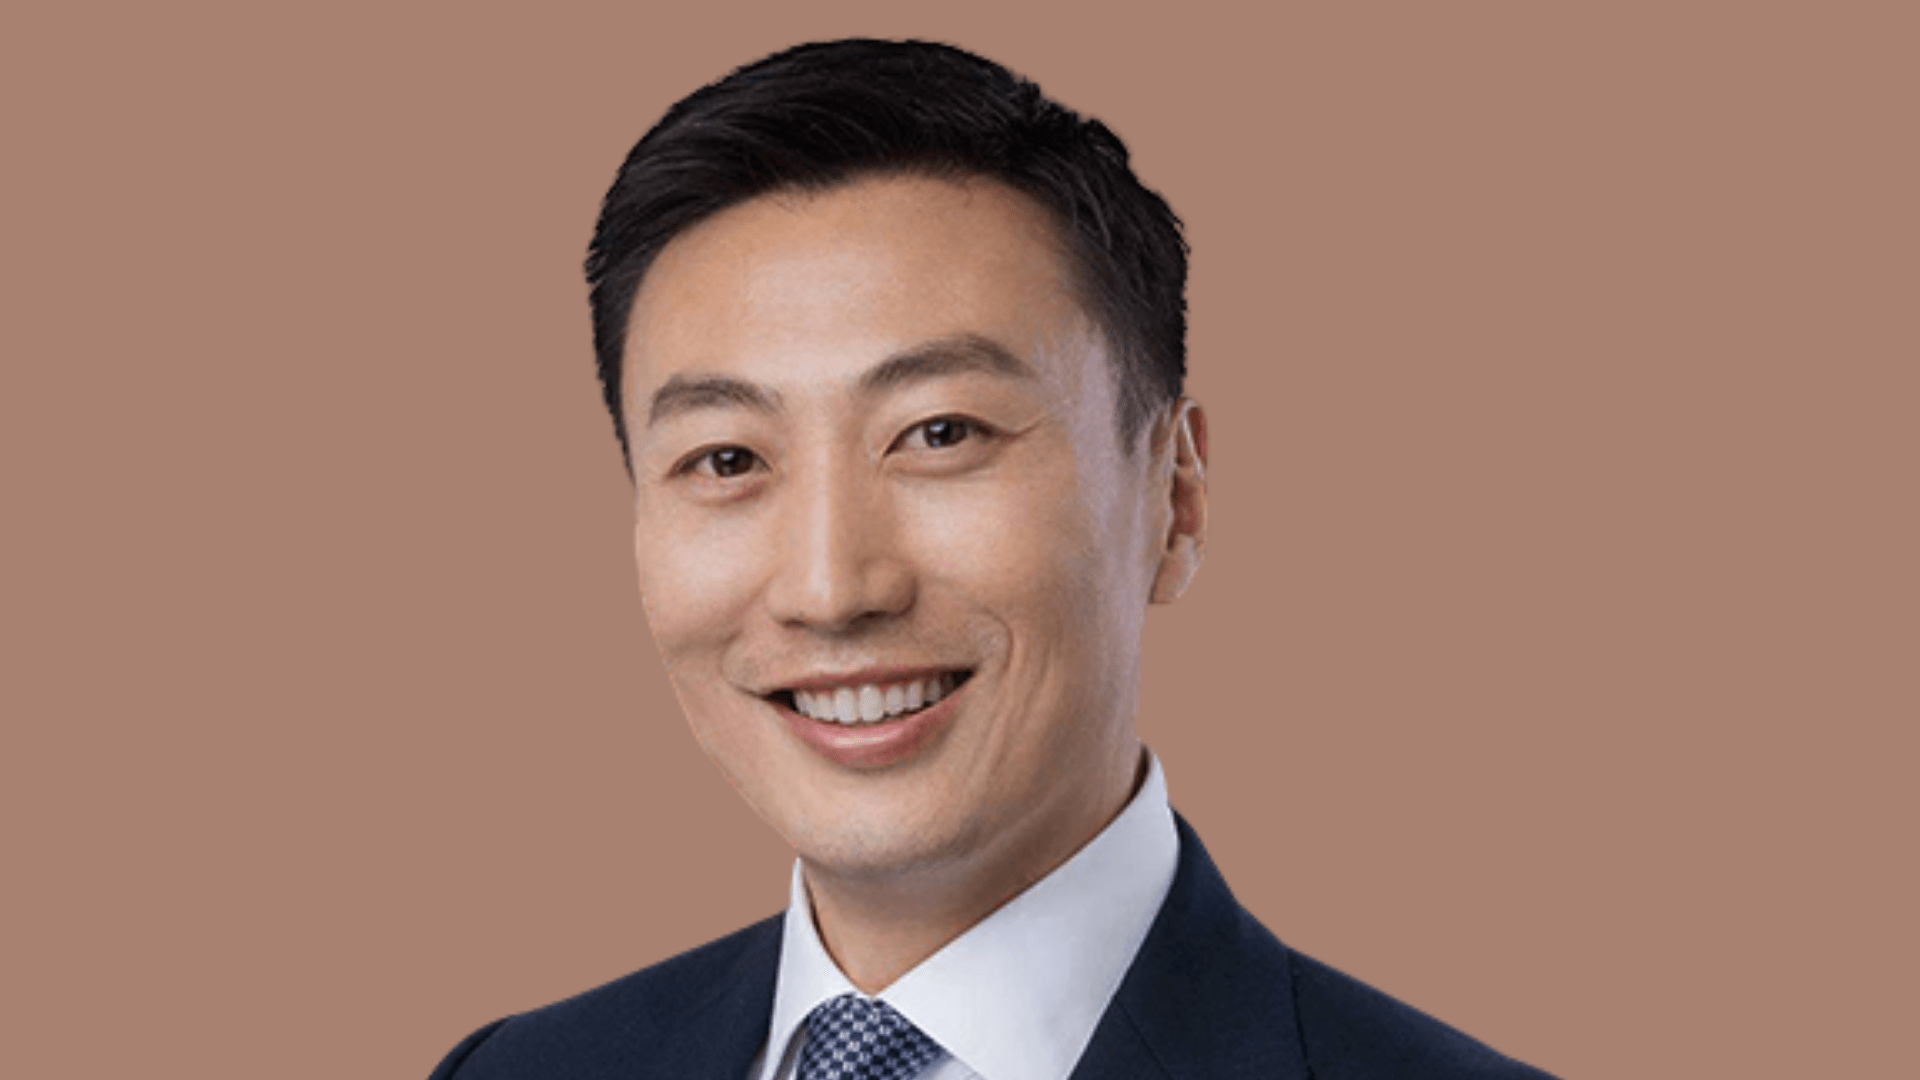 L Catterton Asia said to rope in TPG's Scott Chen as co-managing partner